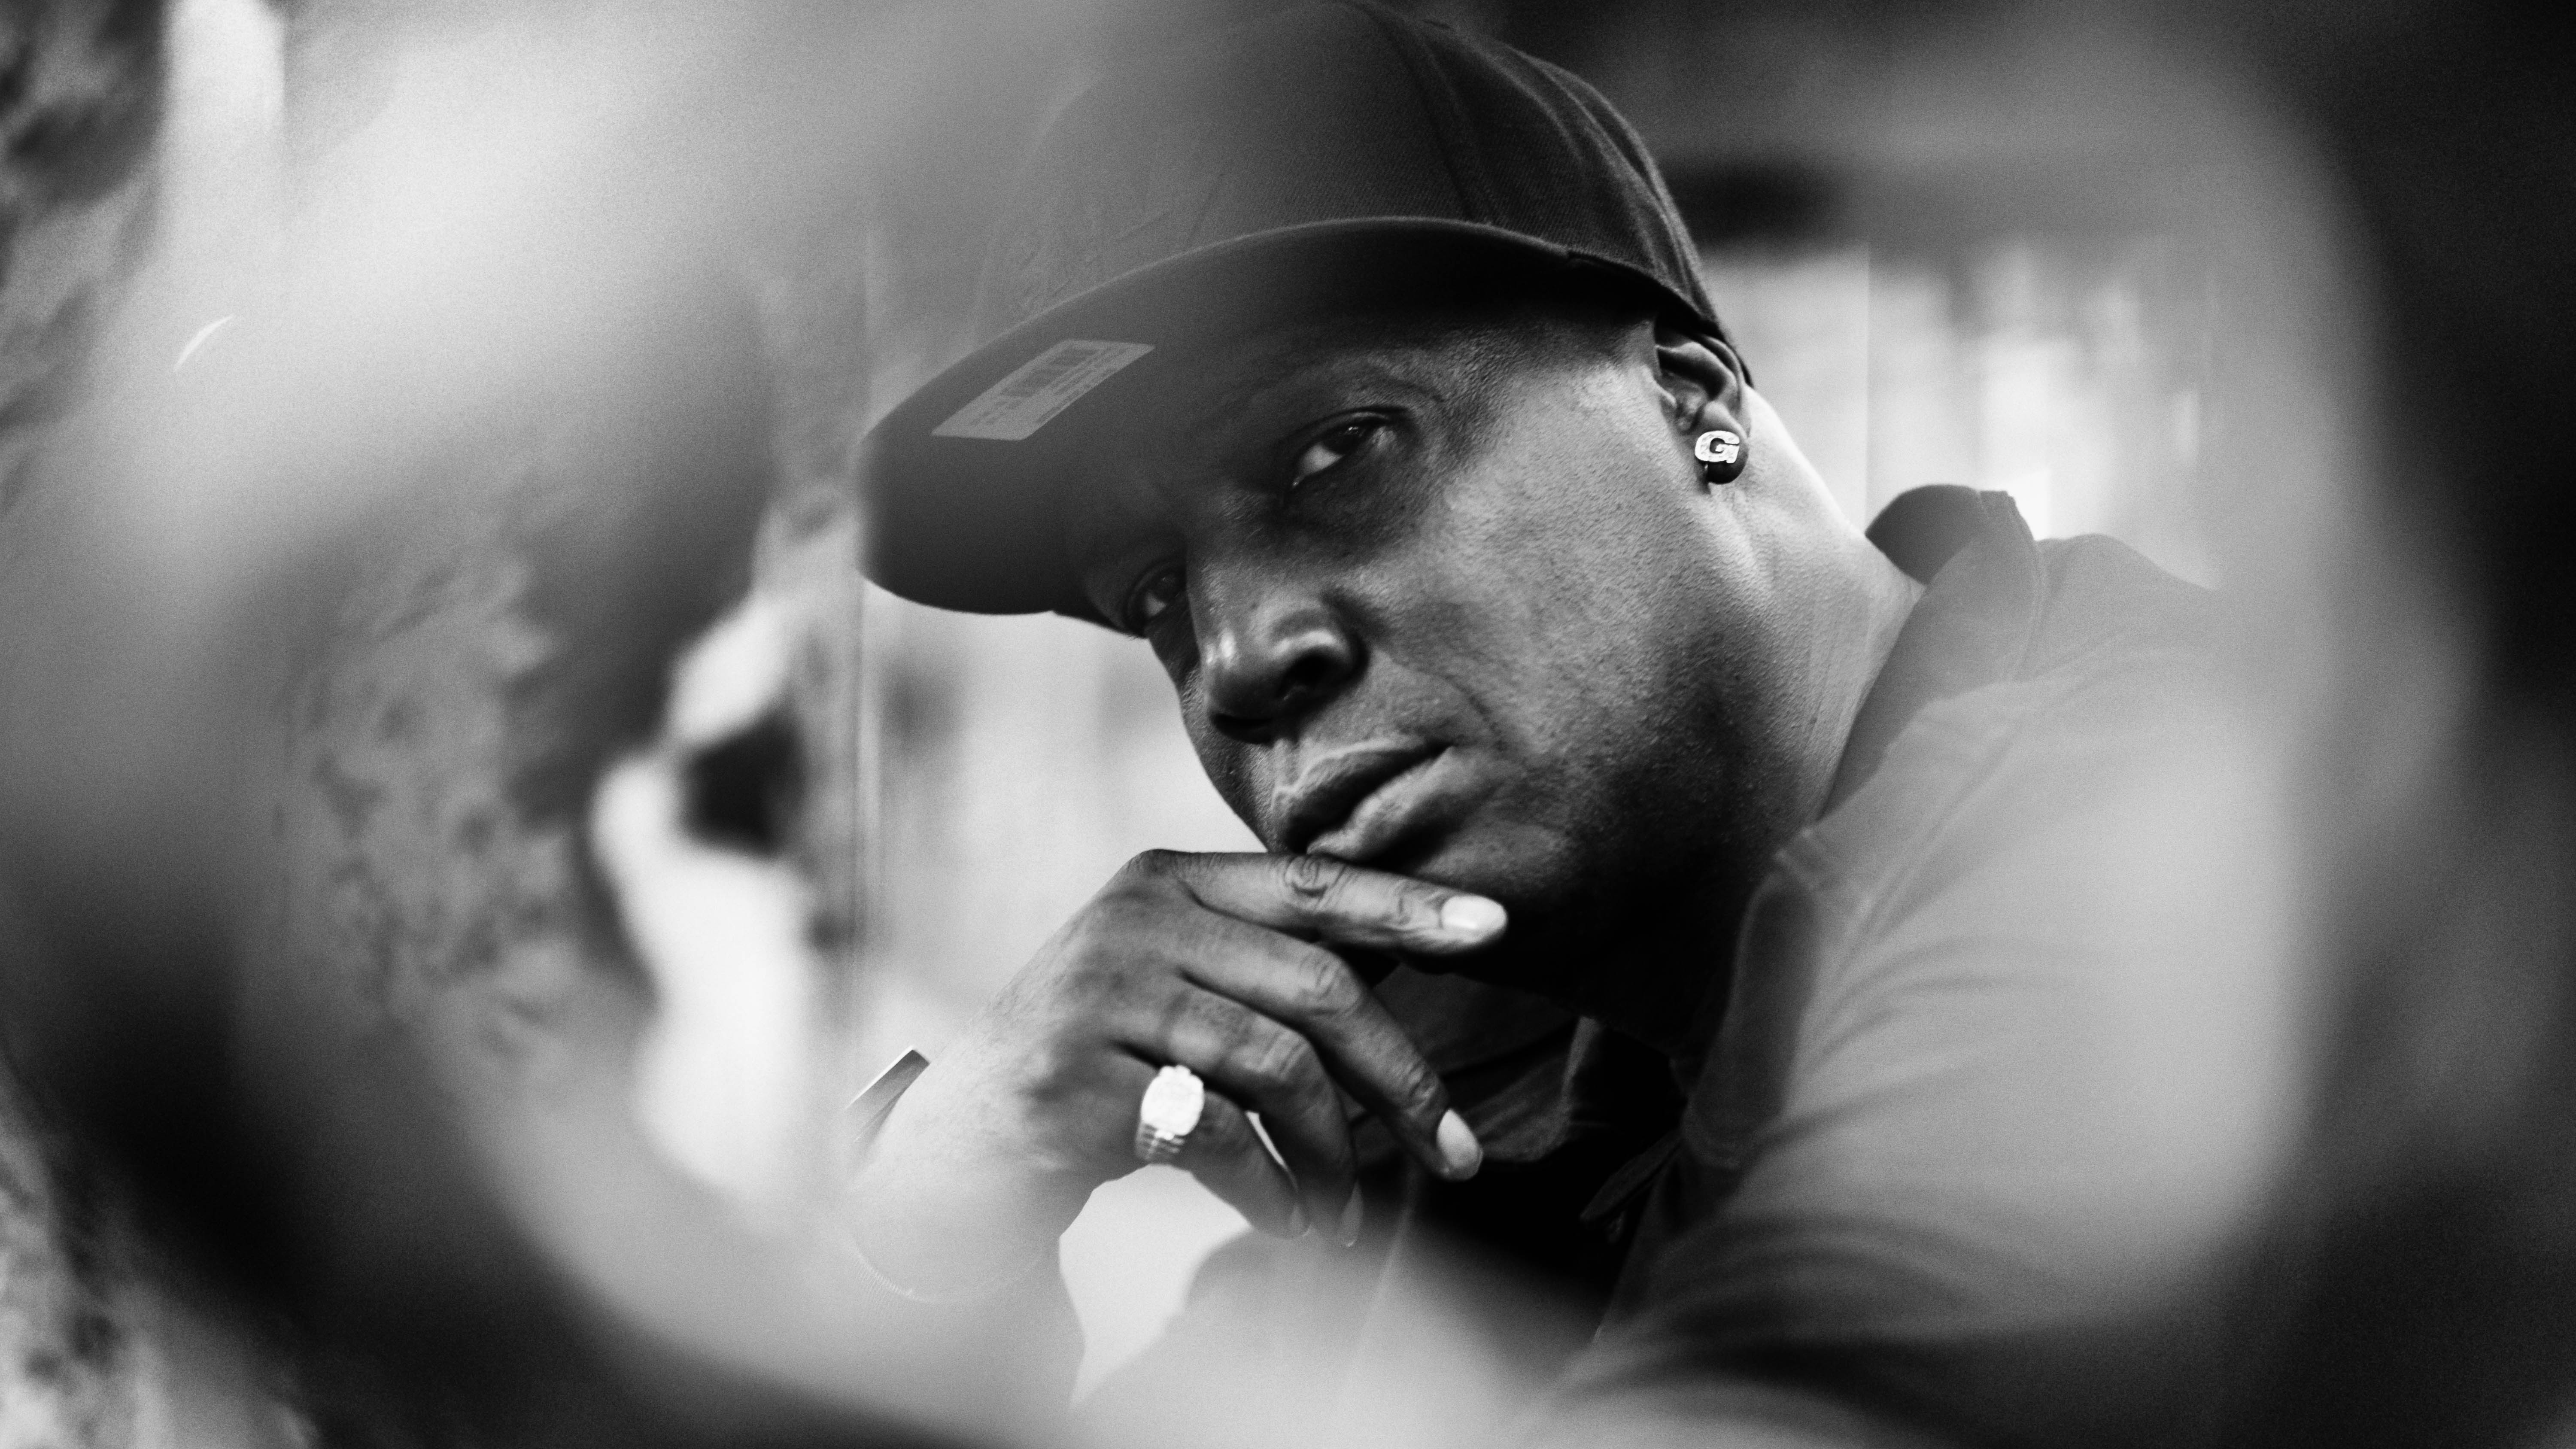 Grandmaster Flash: man who gave us the turntable as an | What Hi-Fi?